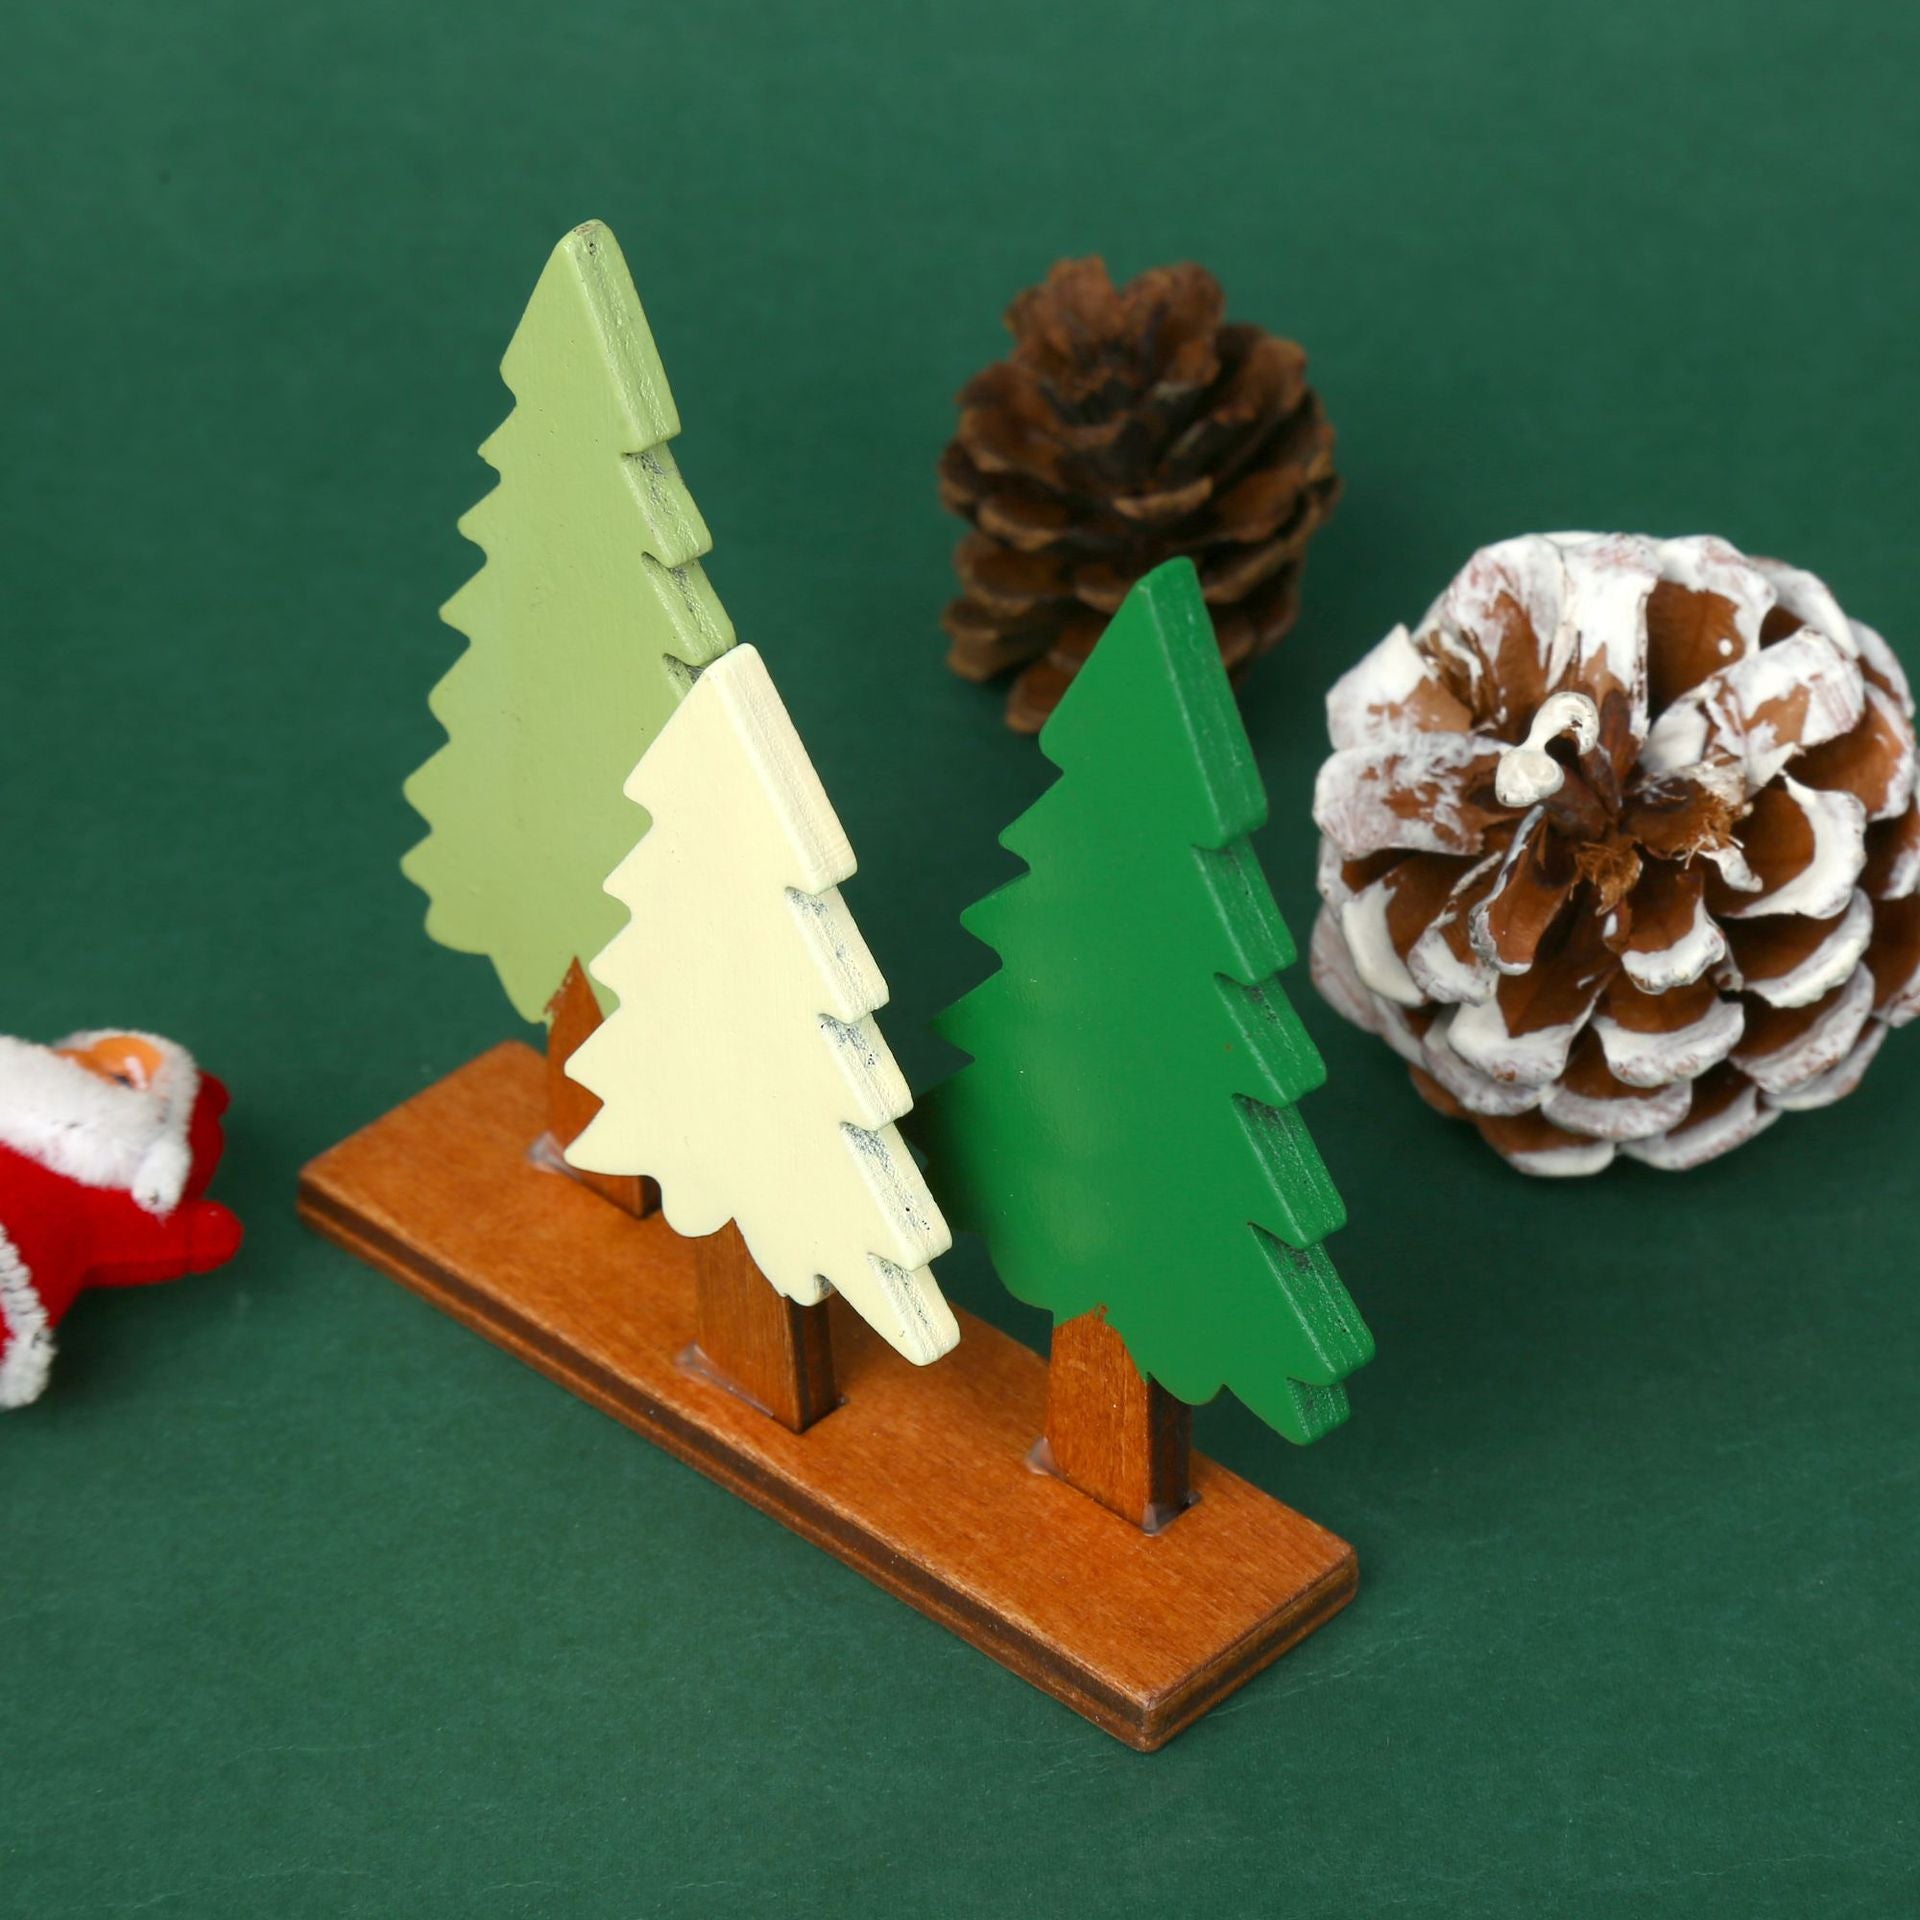 Wooden Christmas Pine Ornaments